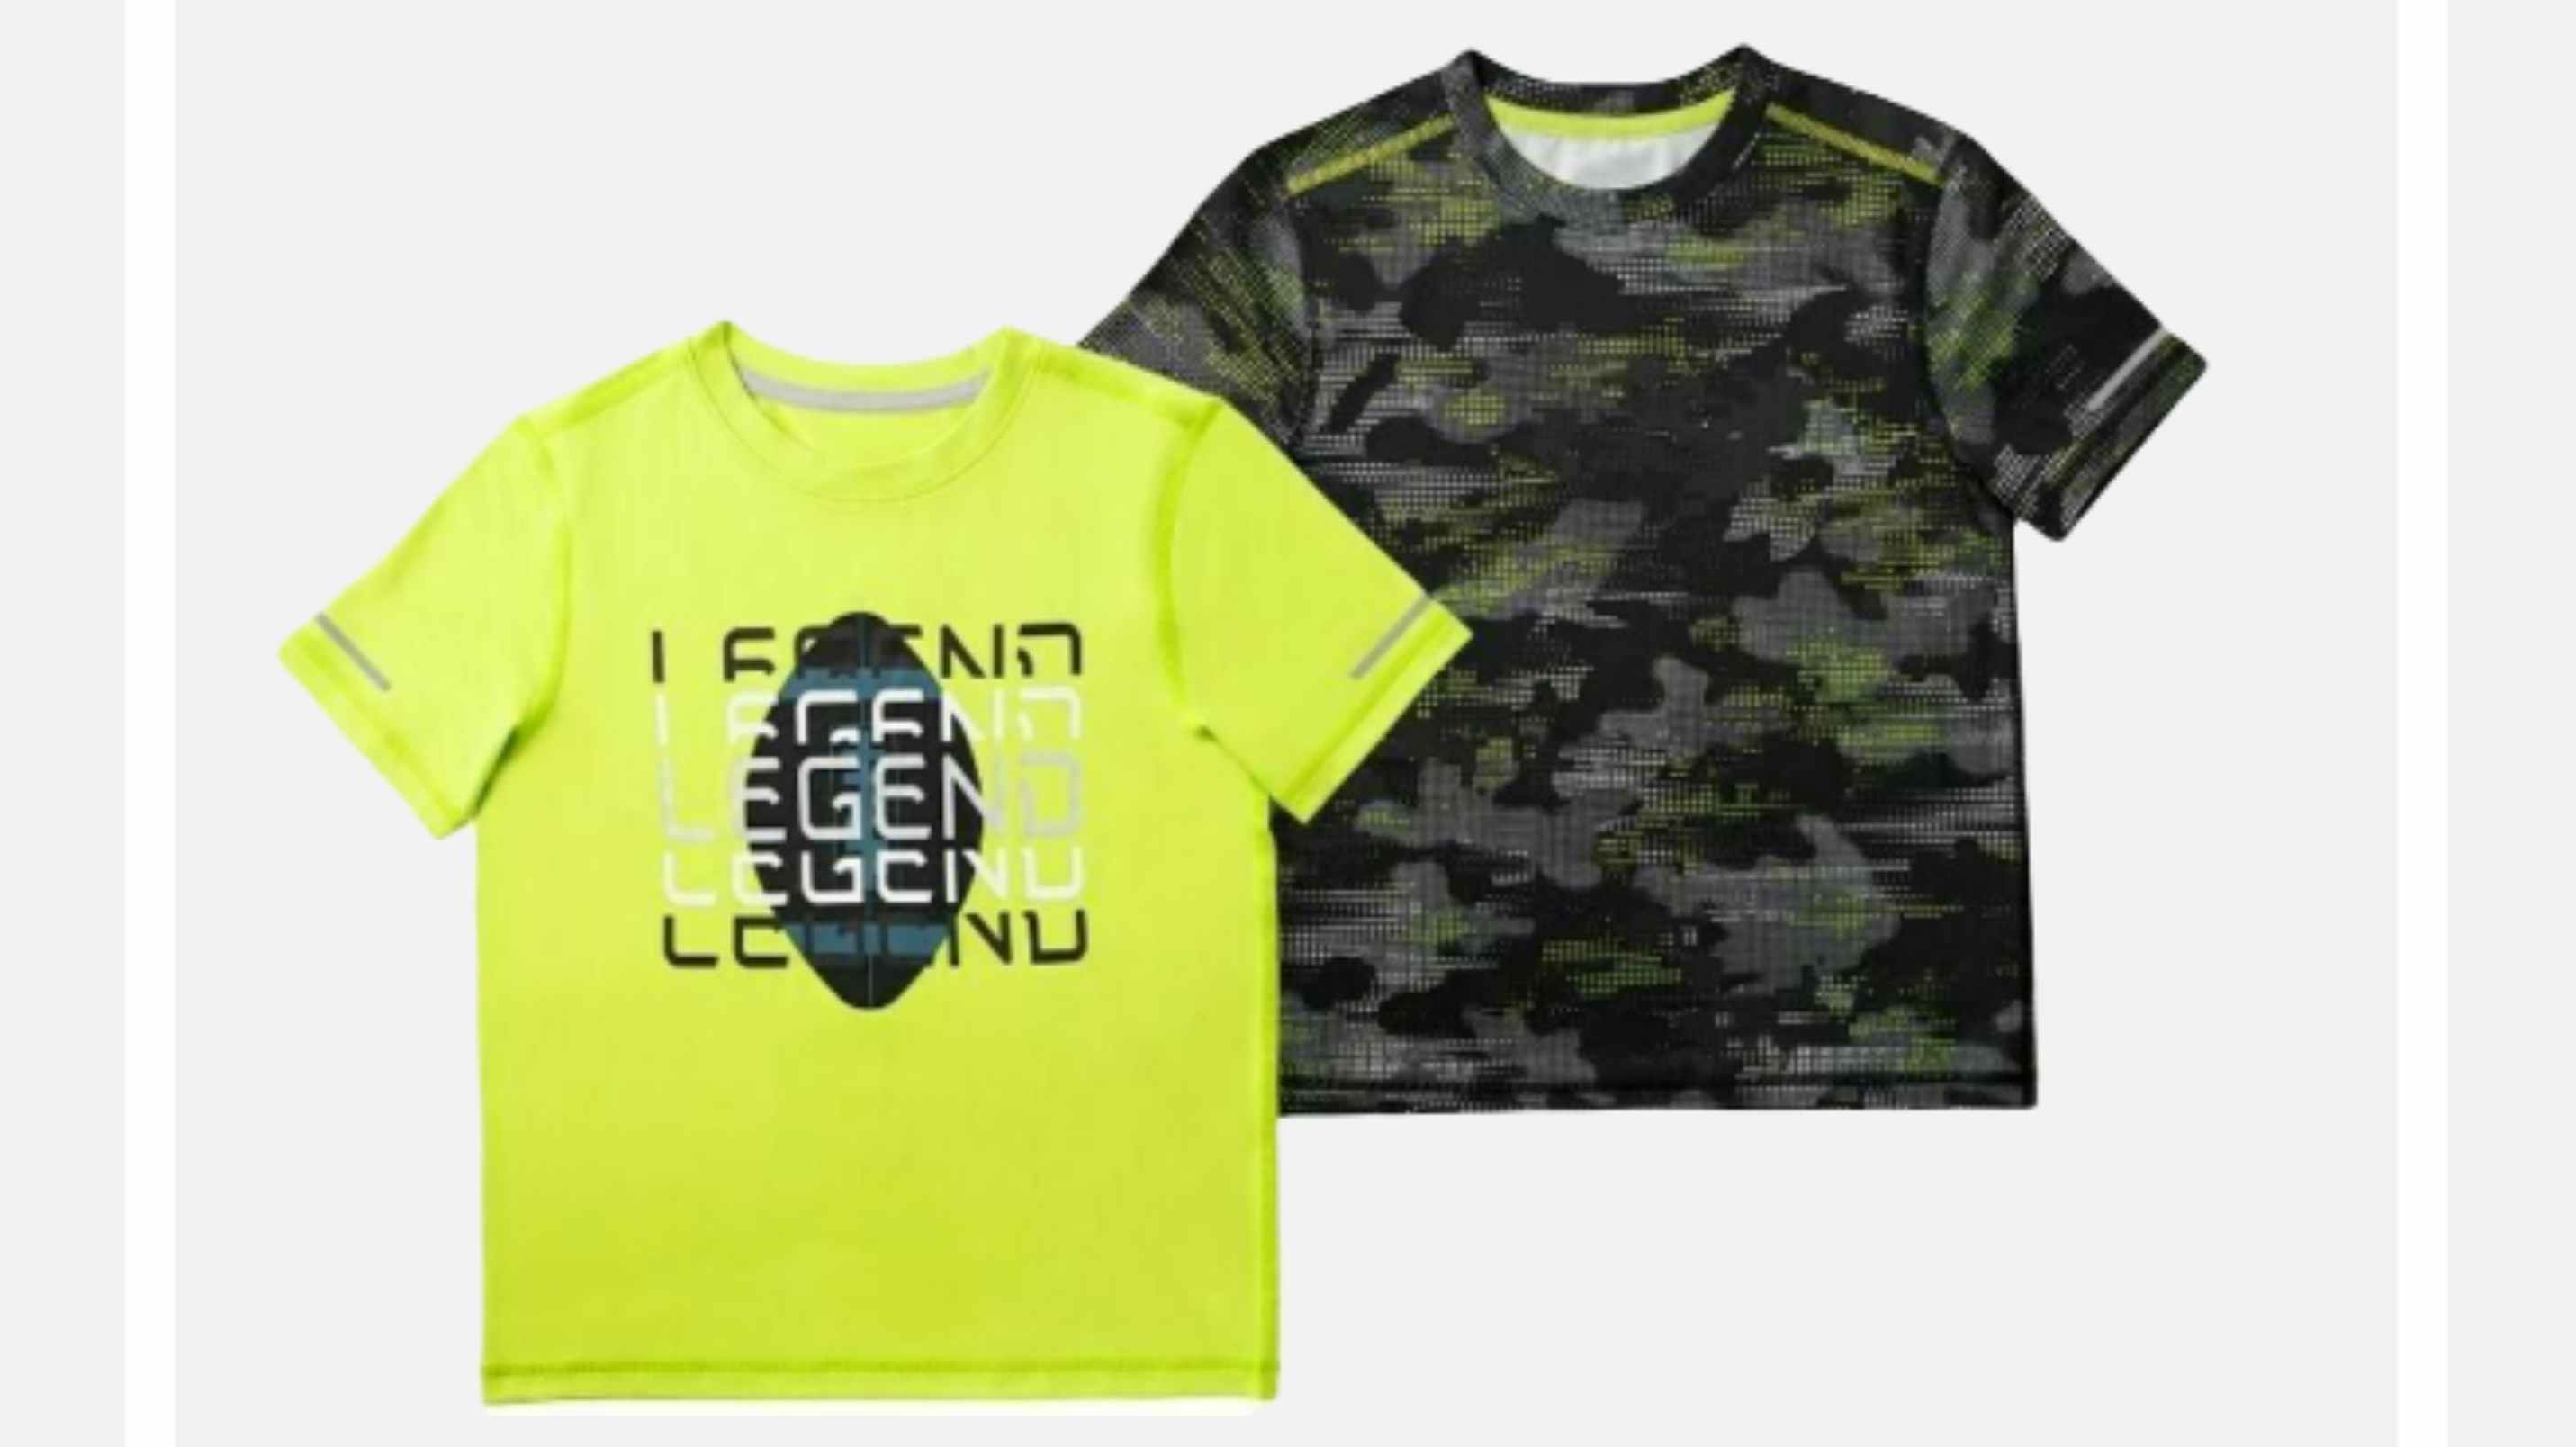 2 pack of tees for kids, one is lime green and says legend, the other is black and grey camo